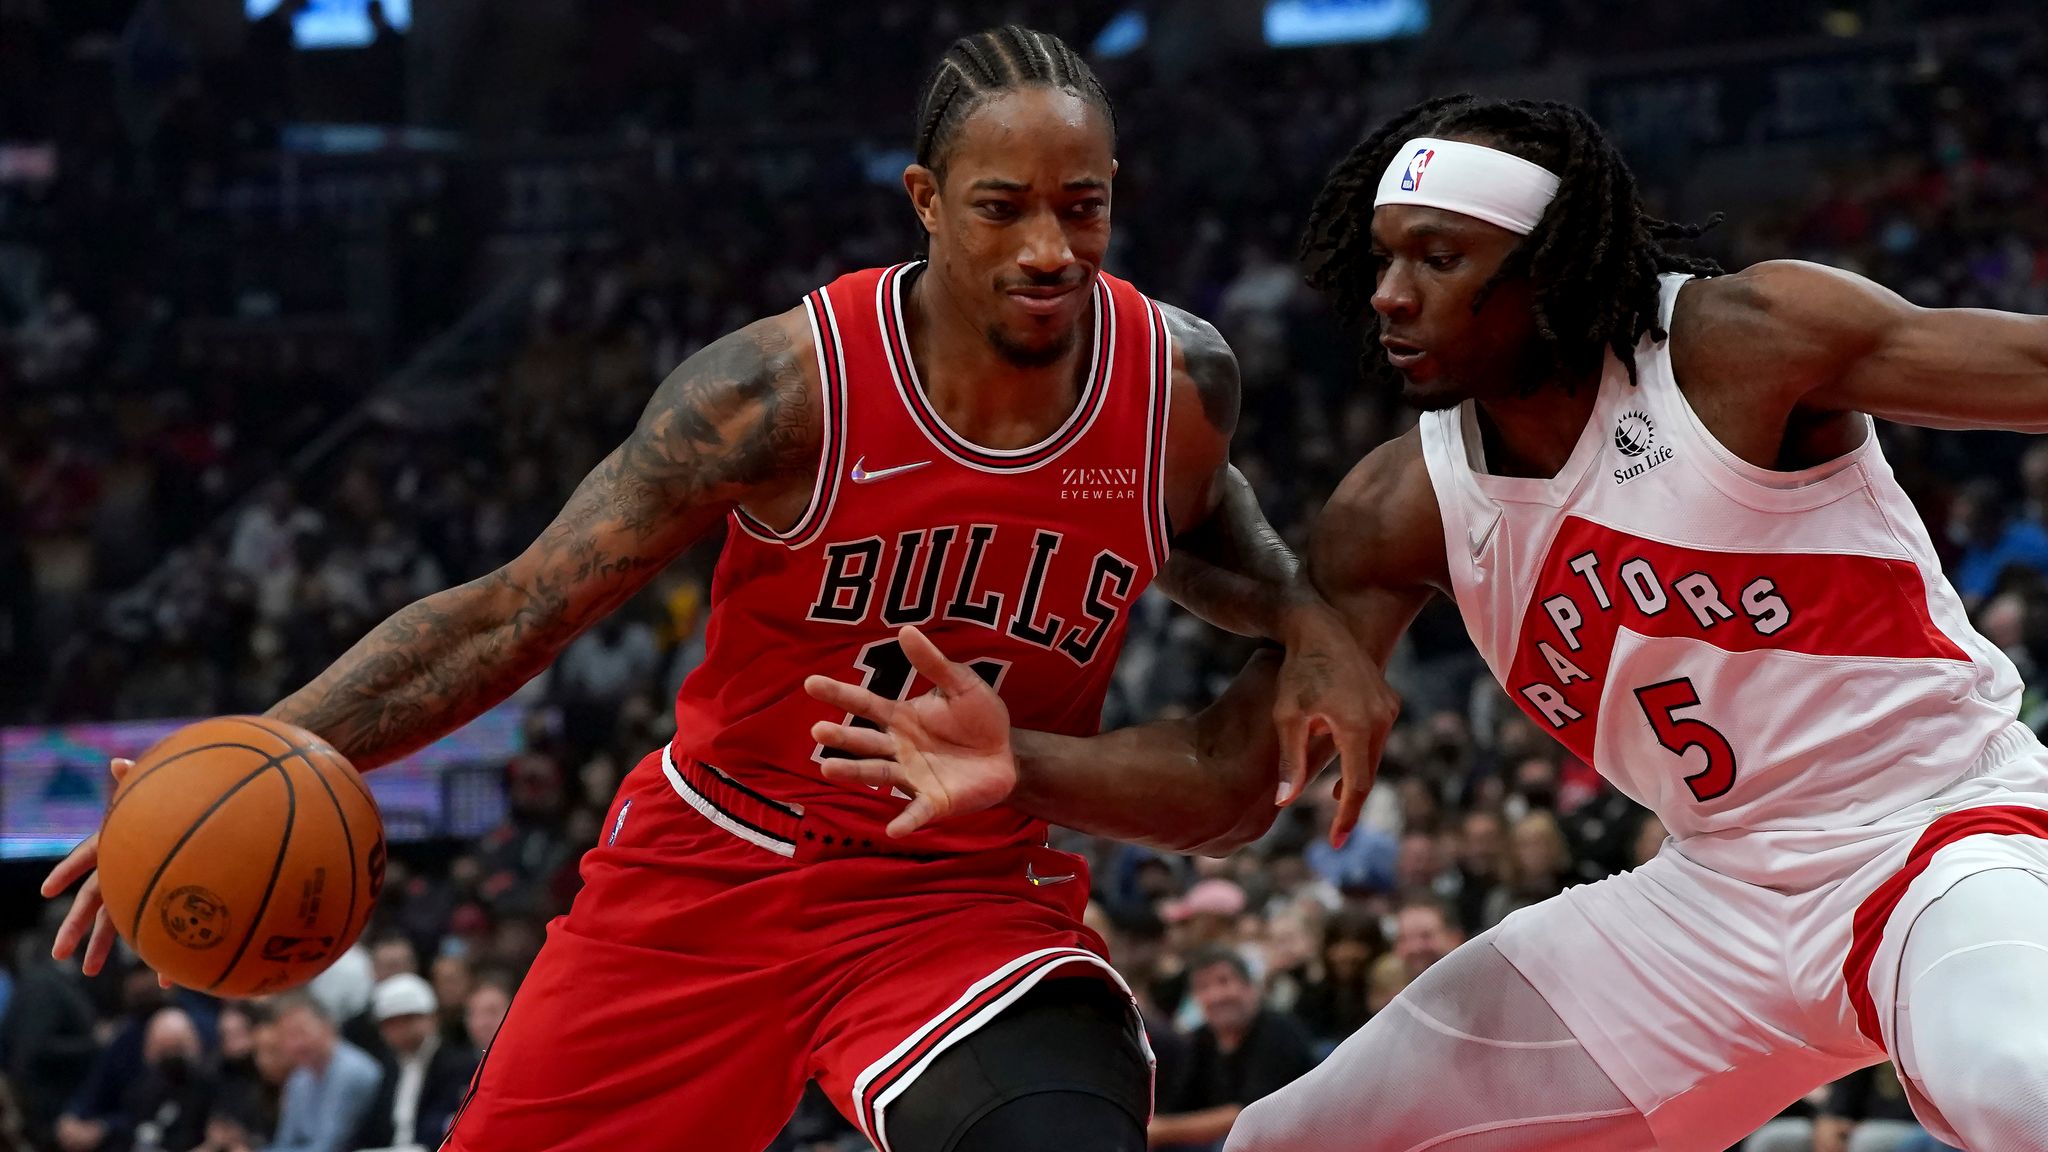 DeMar DeRozan leads Bulls past Wizards, makes NBA history with